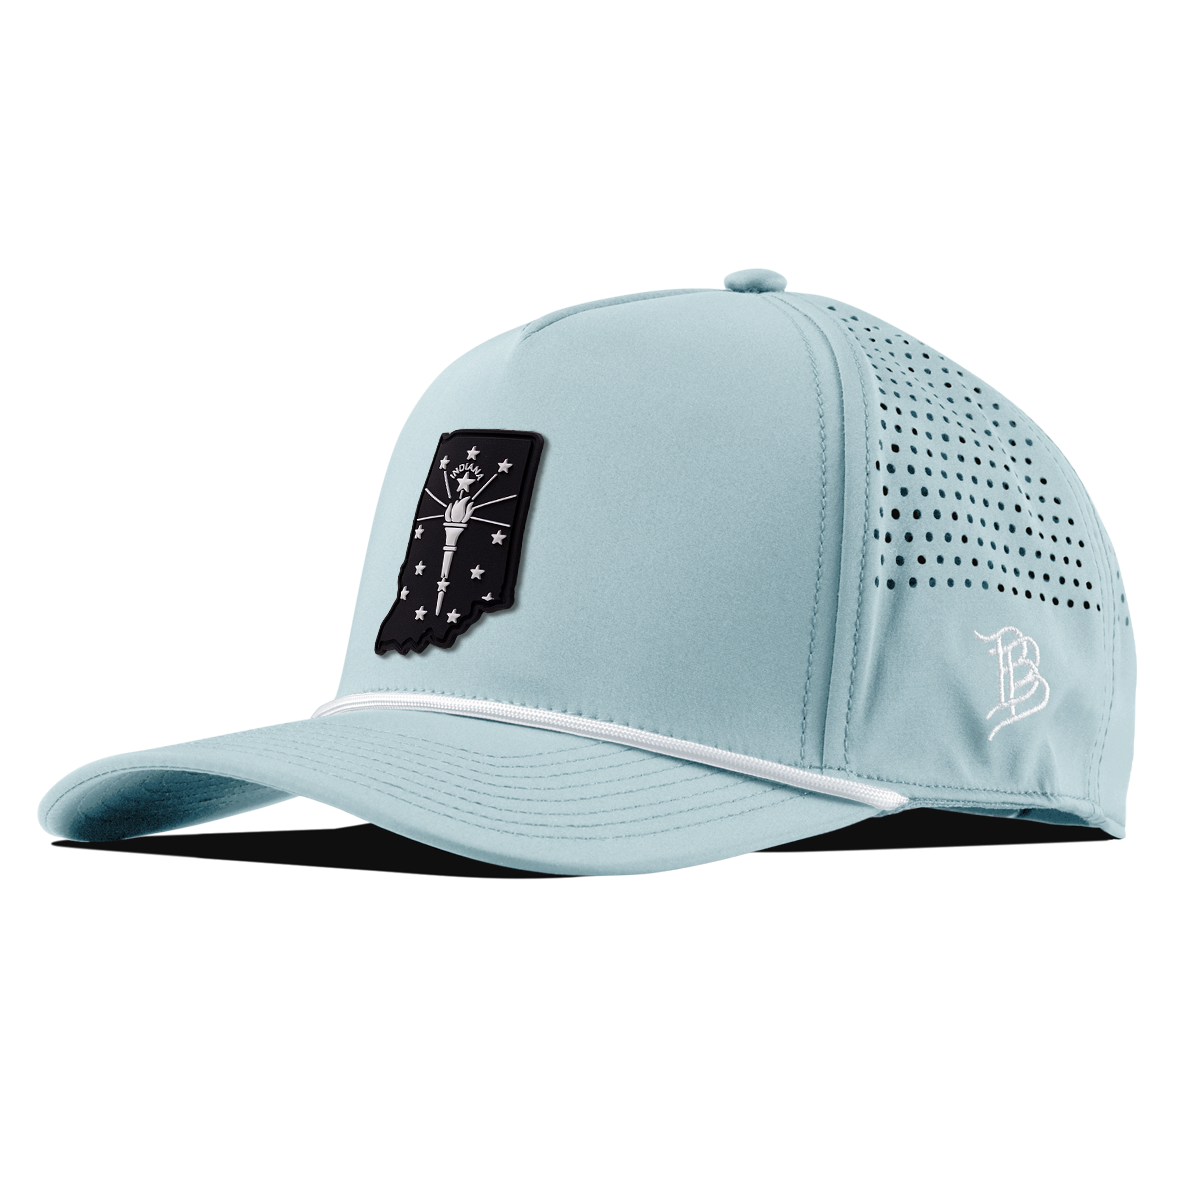 Indiana Vintage Curved 5 Panel Rope Sky Blue/White